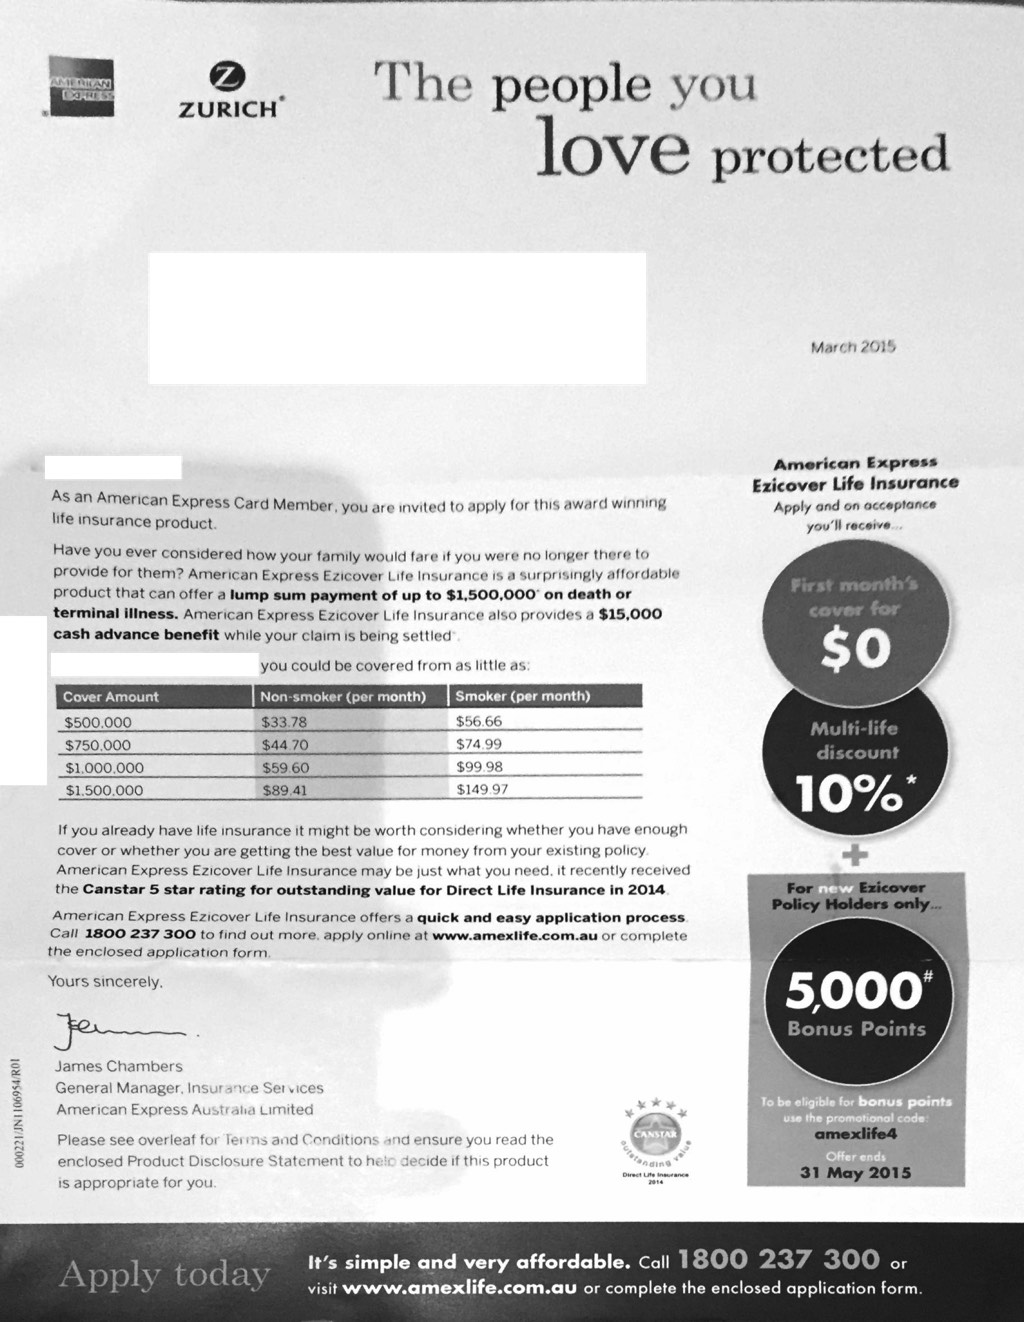 Amex 5000 point bonus for Life Insurance March 2015